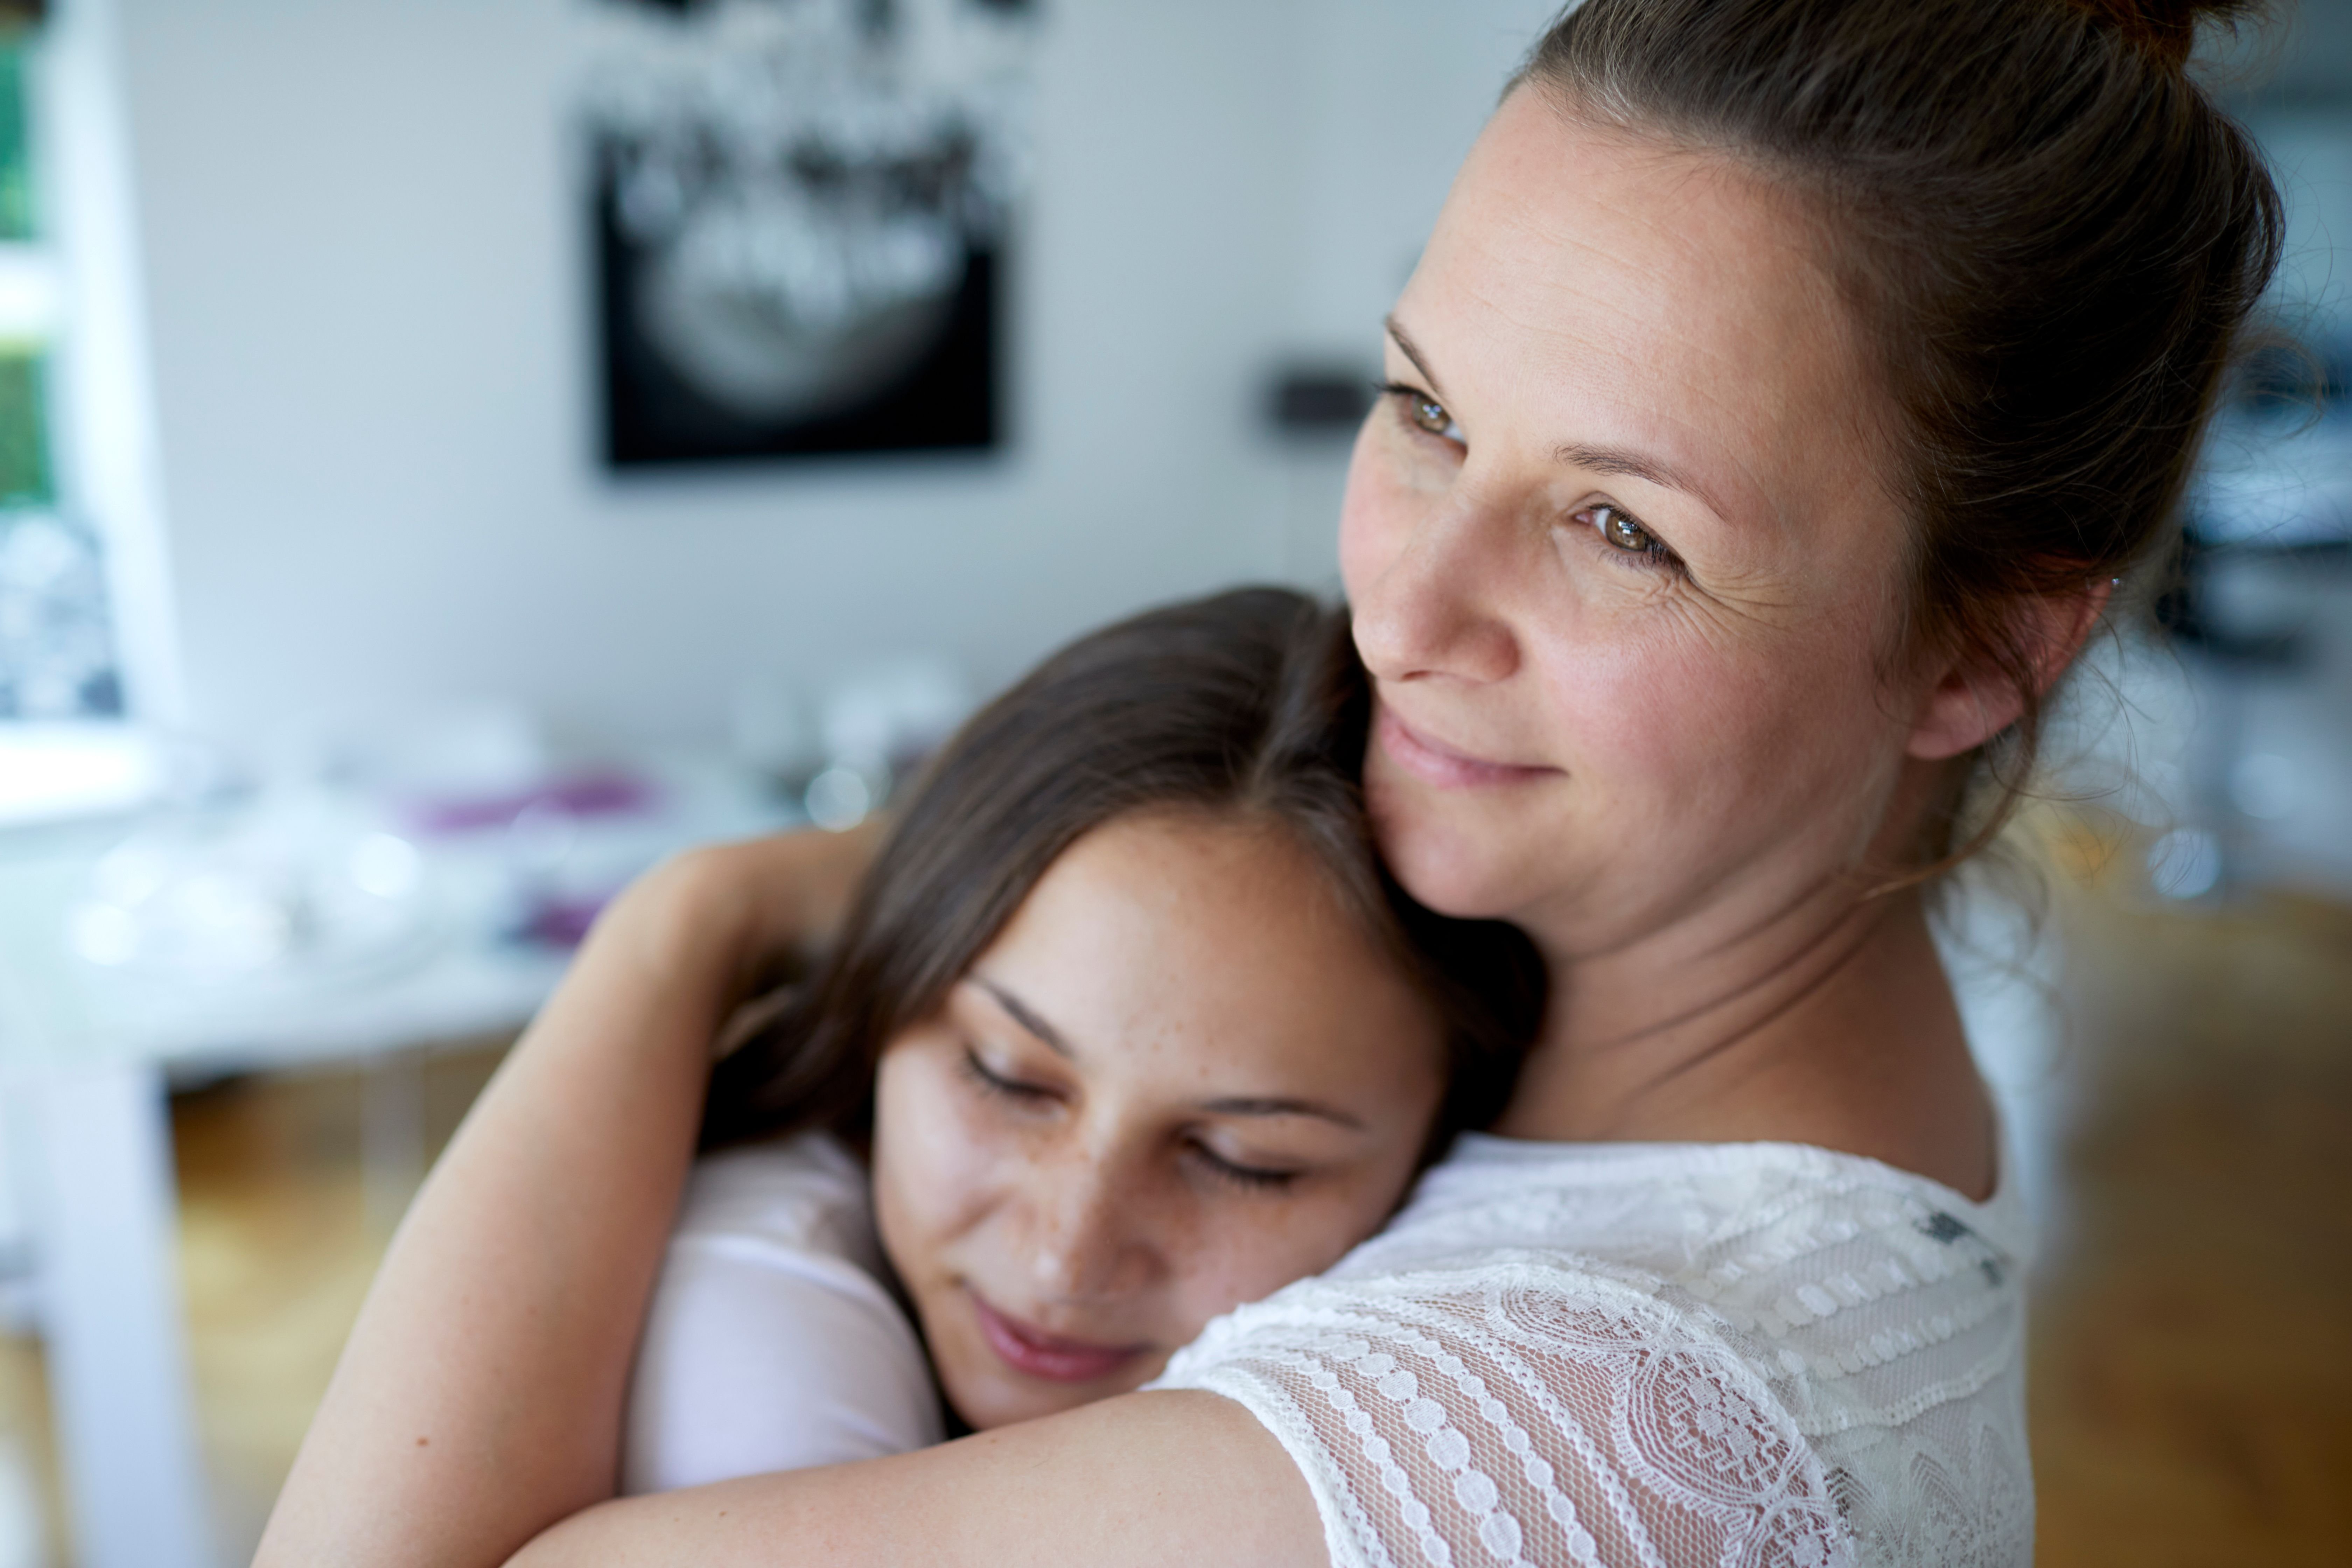 A mother and daughter hugging. | Source: Shutterstock